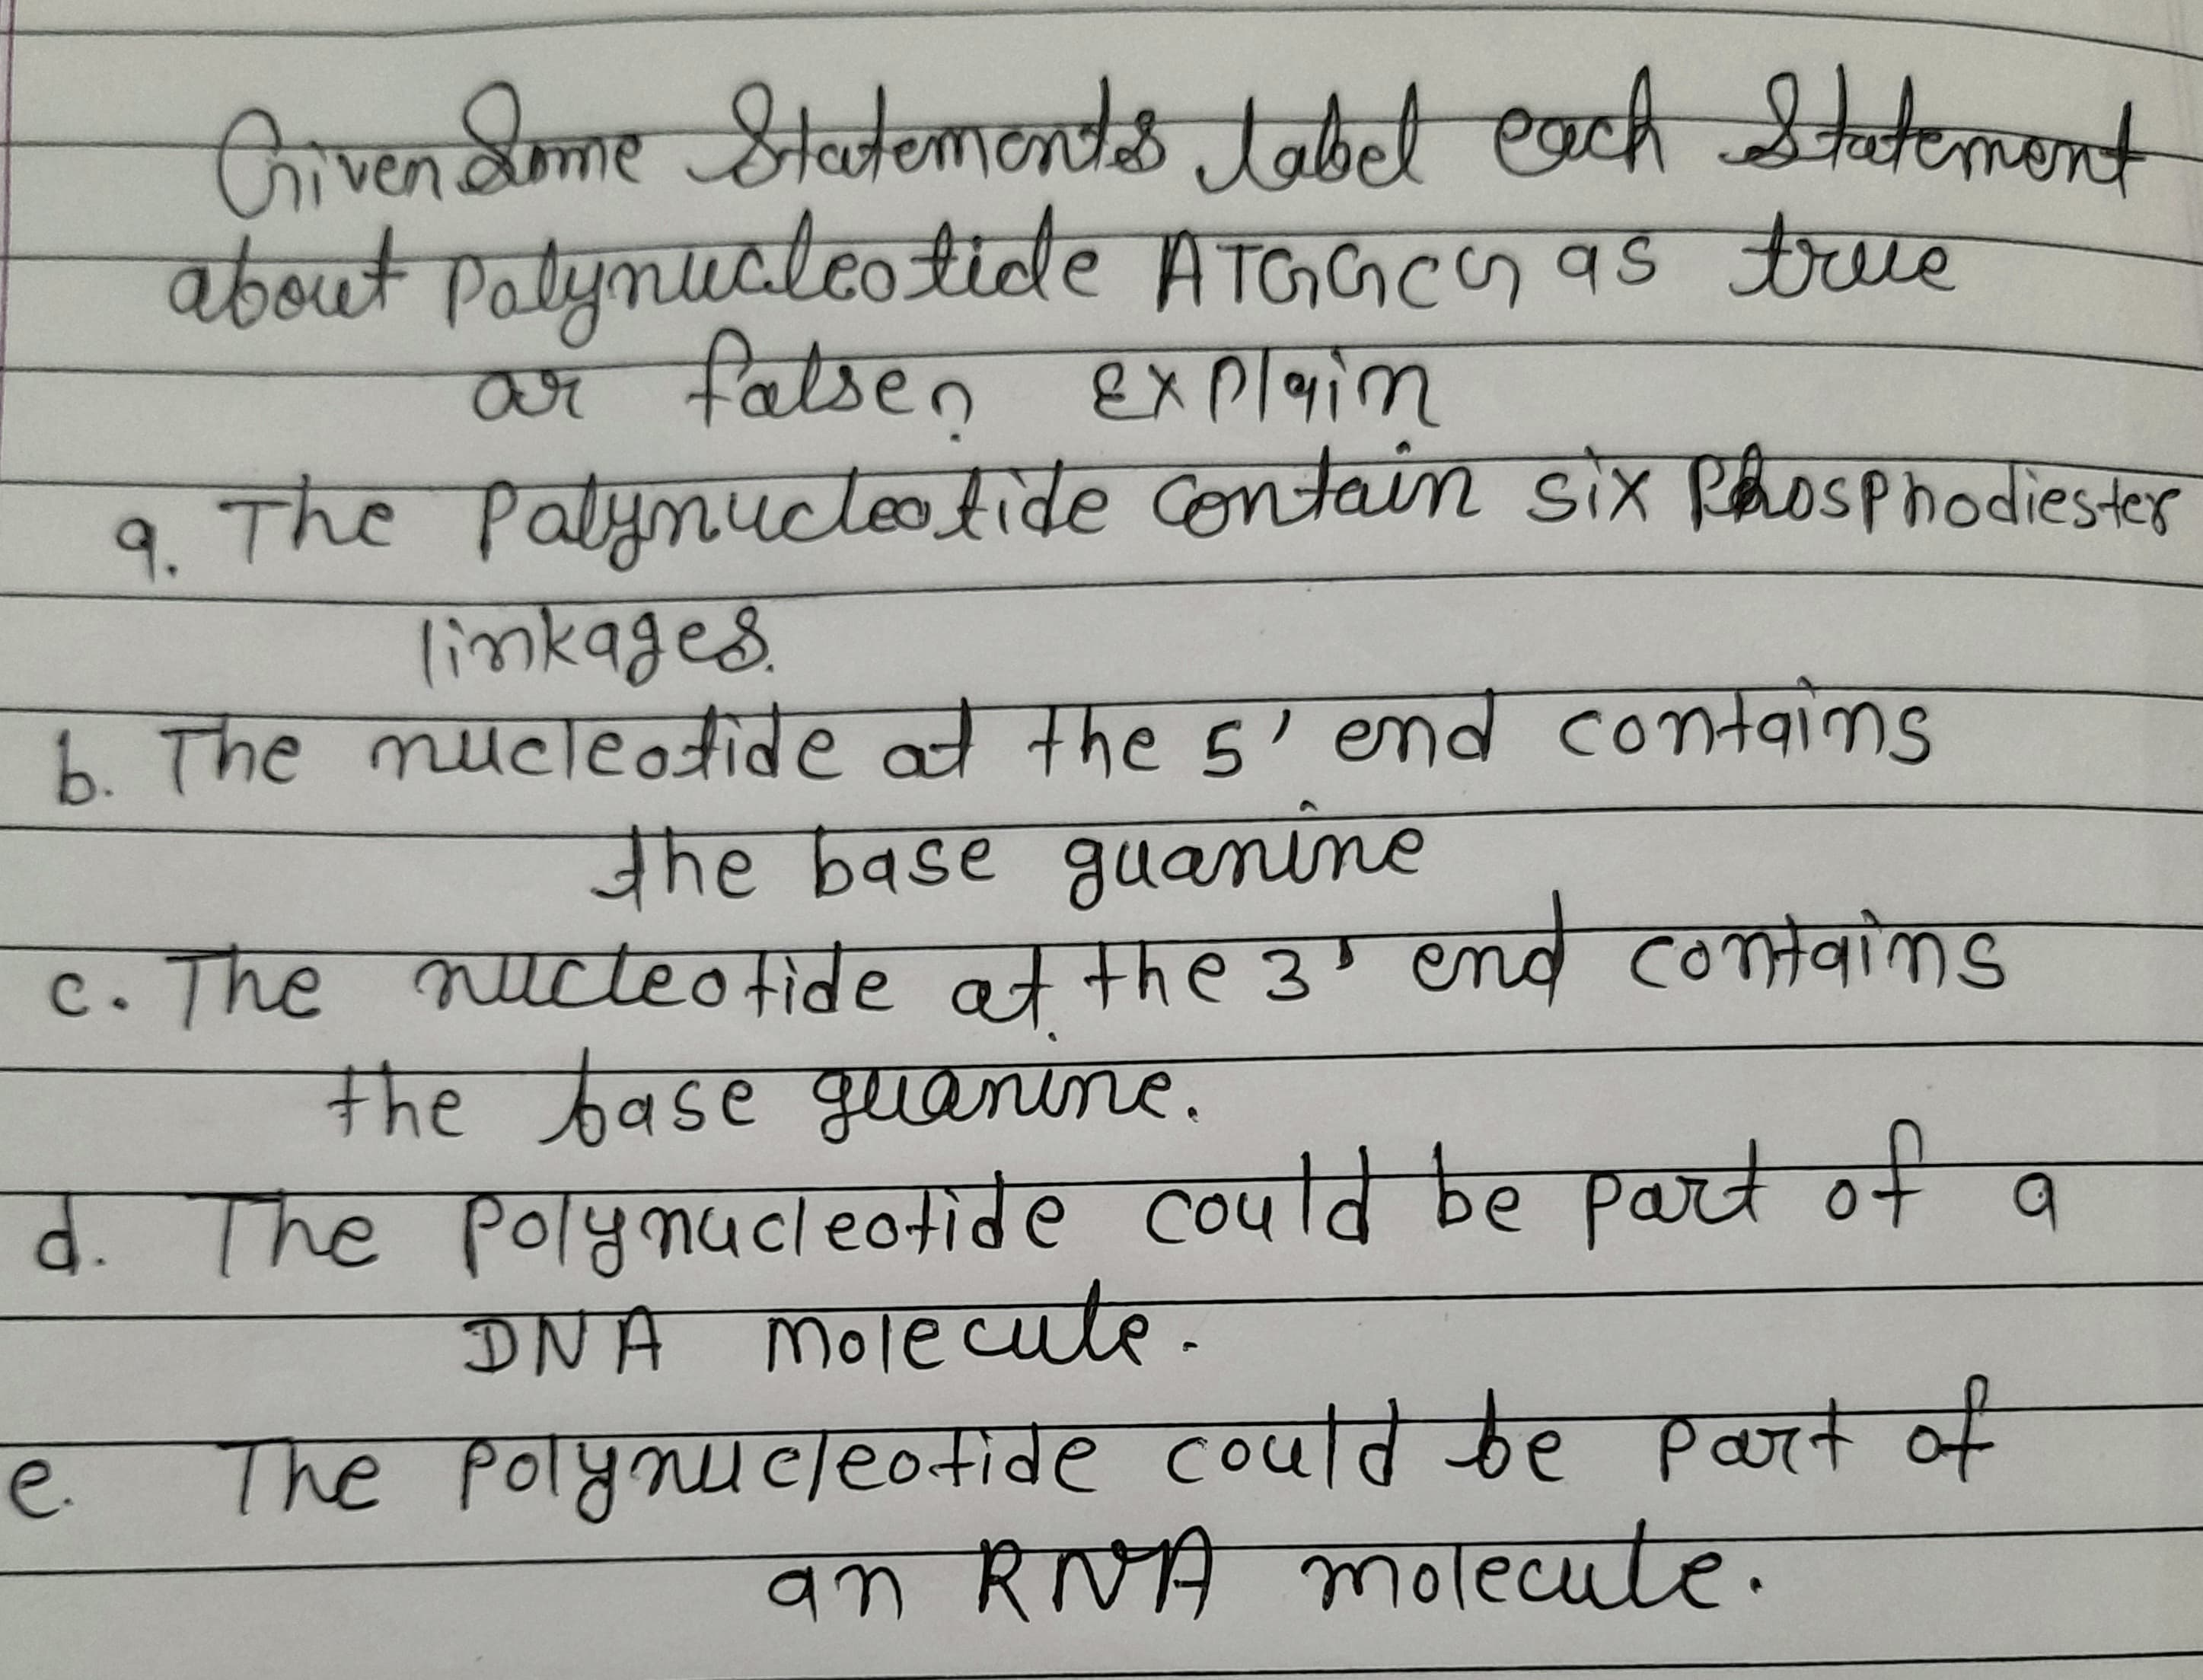 Orvendme Statemonts tabet each eent
about Patymucleotide ATGGCS as true
ar
2 fatsen explaim
The Patymucteotide contain six Rhosphodiester
limkages.
9.
b. The mucleotide at the5' end contgims
the base guanine
c. The nucteofide at the 3"
' end comtaims
कव (oTaवोकड
the base guanine.
d. The Polynucleotide could be part of a
DNA Mole cuute.
The Polyoucleo+ide coufवि कe Paat की
an RVA molecute.
C.
